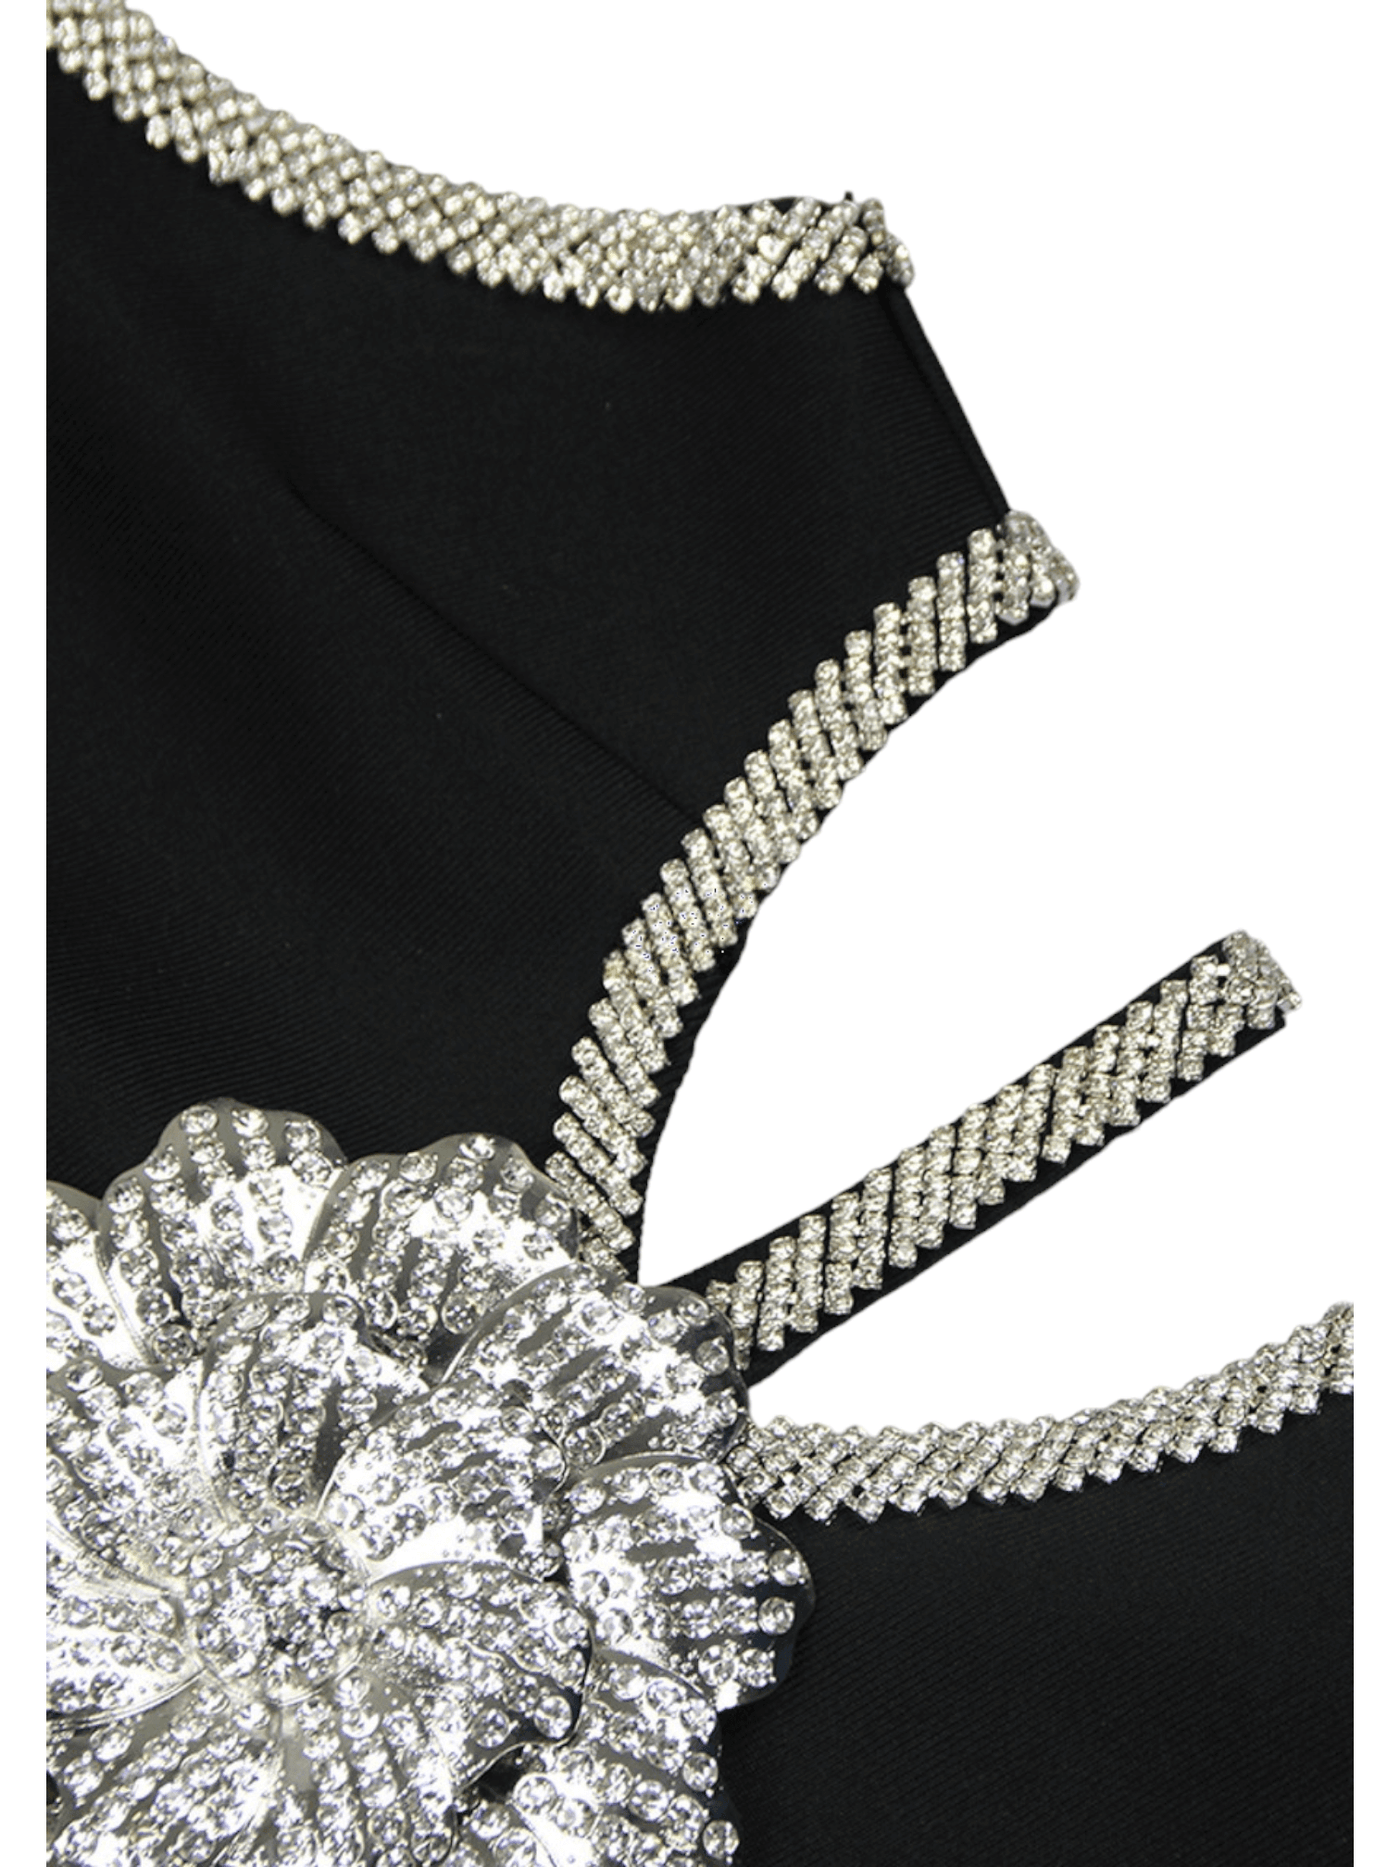 Black Mini Dress with Diamond Flower Cut-Outs - Edgy Glamour for the Night